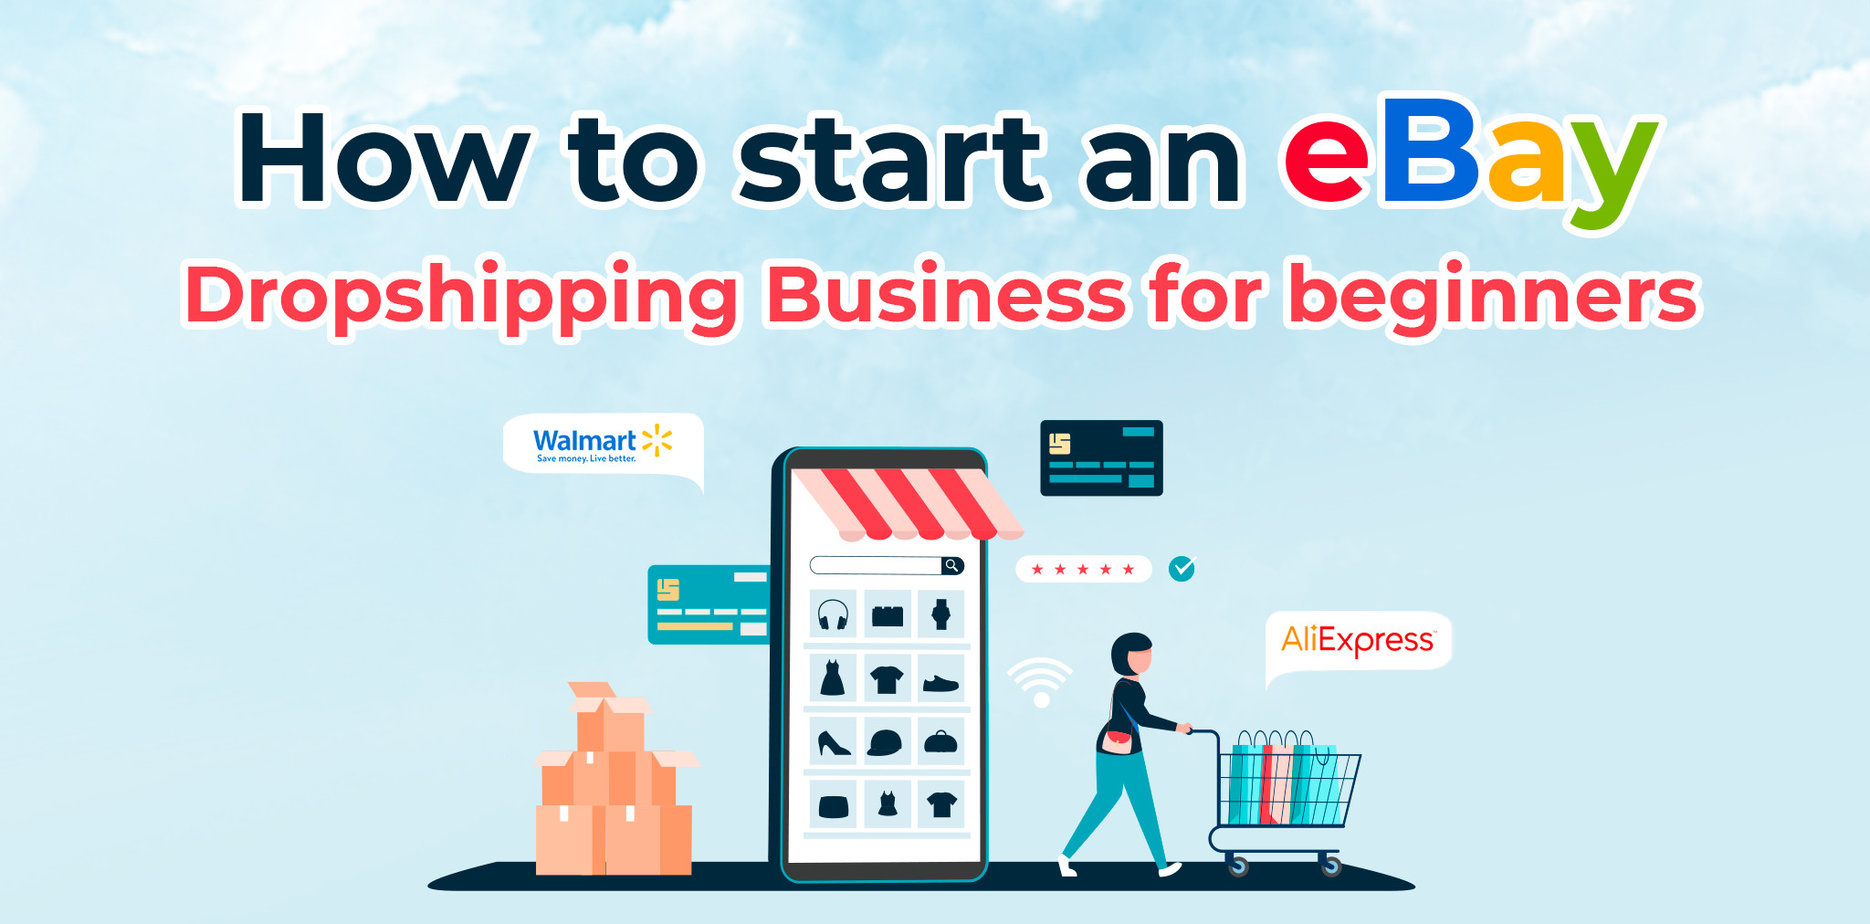 eBay Dropshipping Guide for Beginners